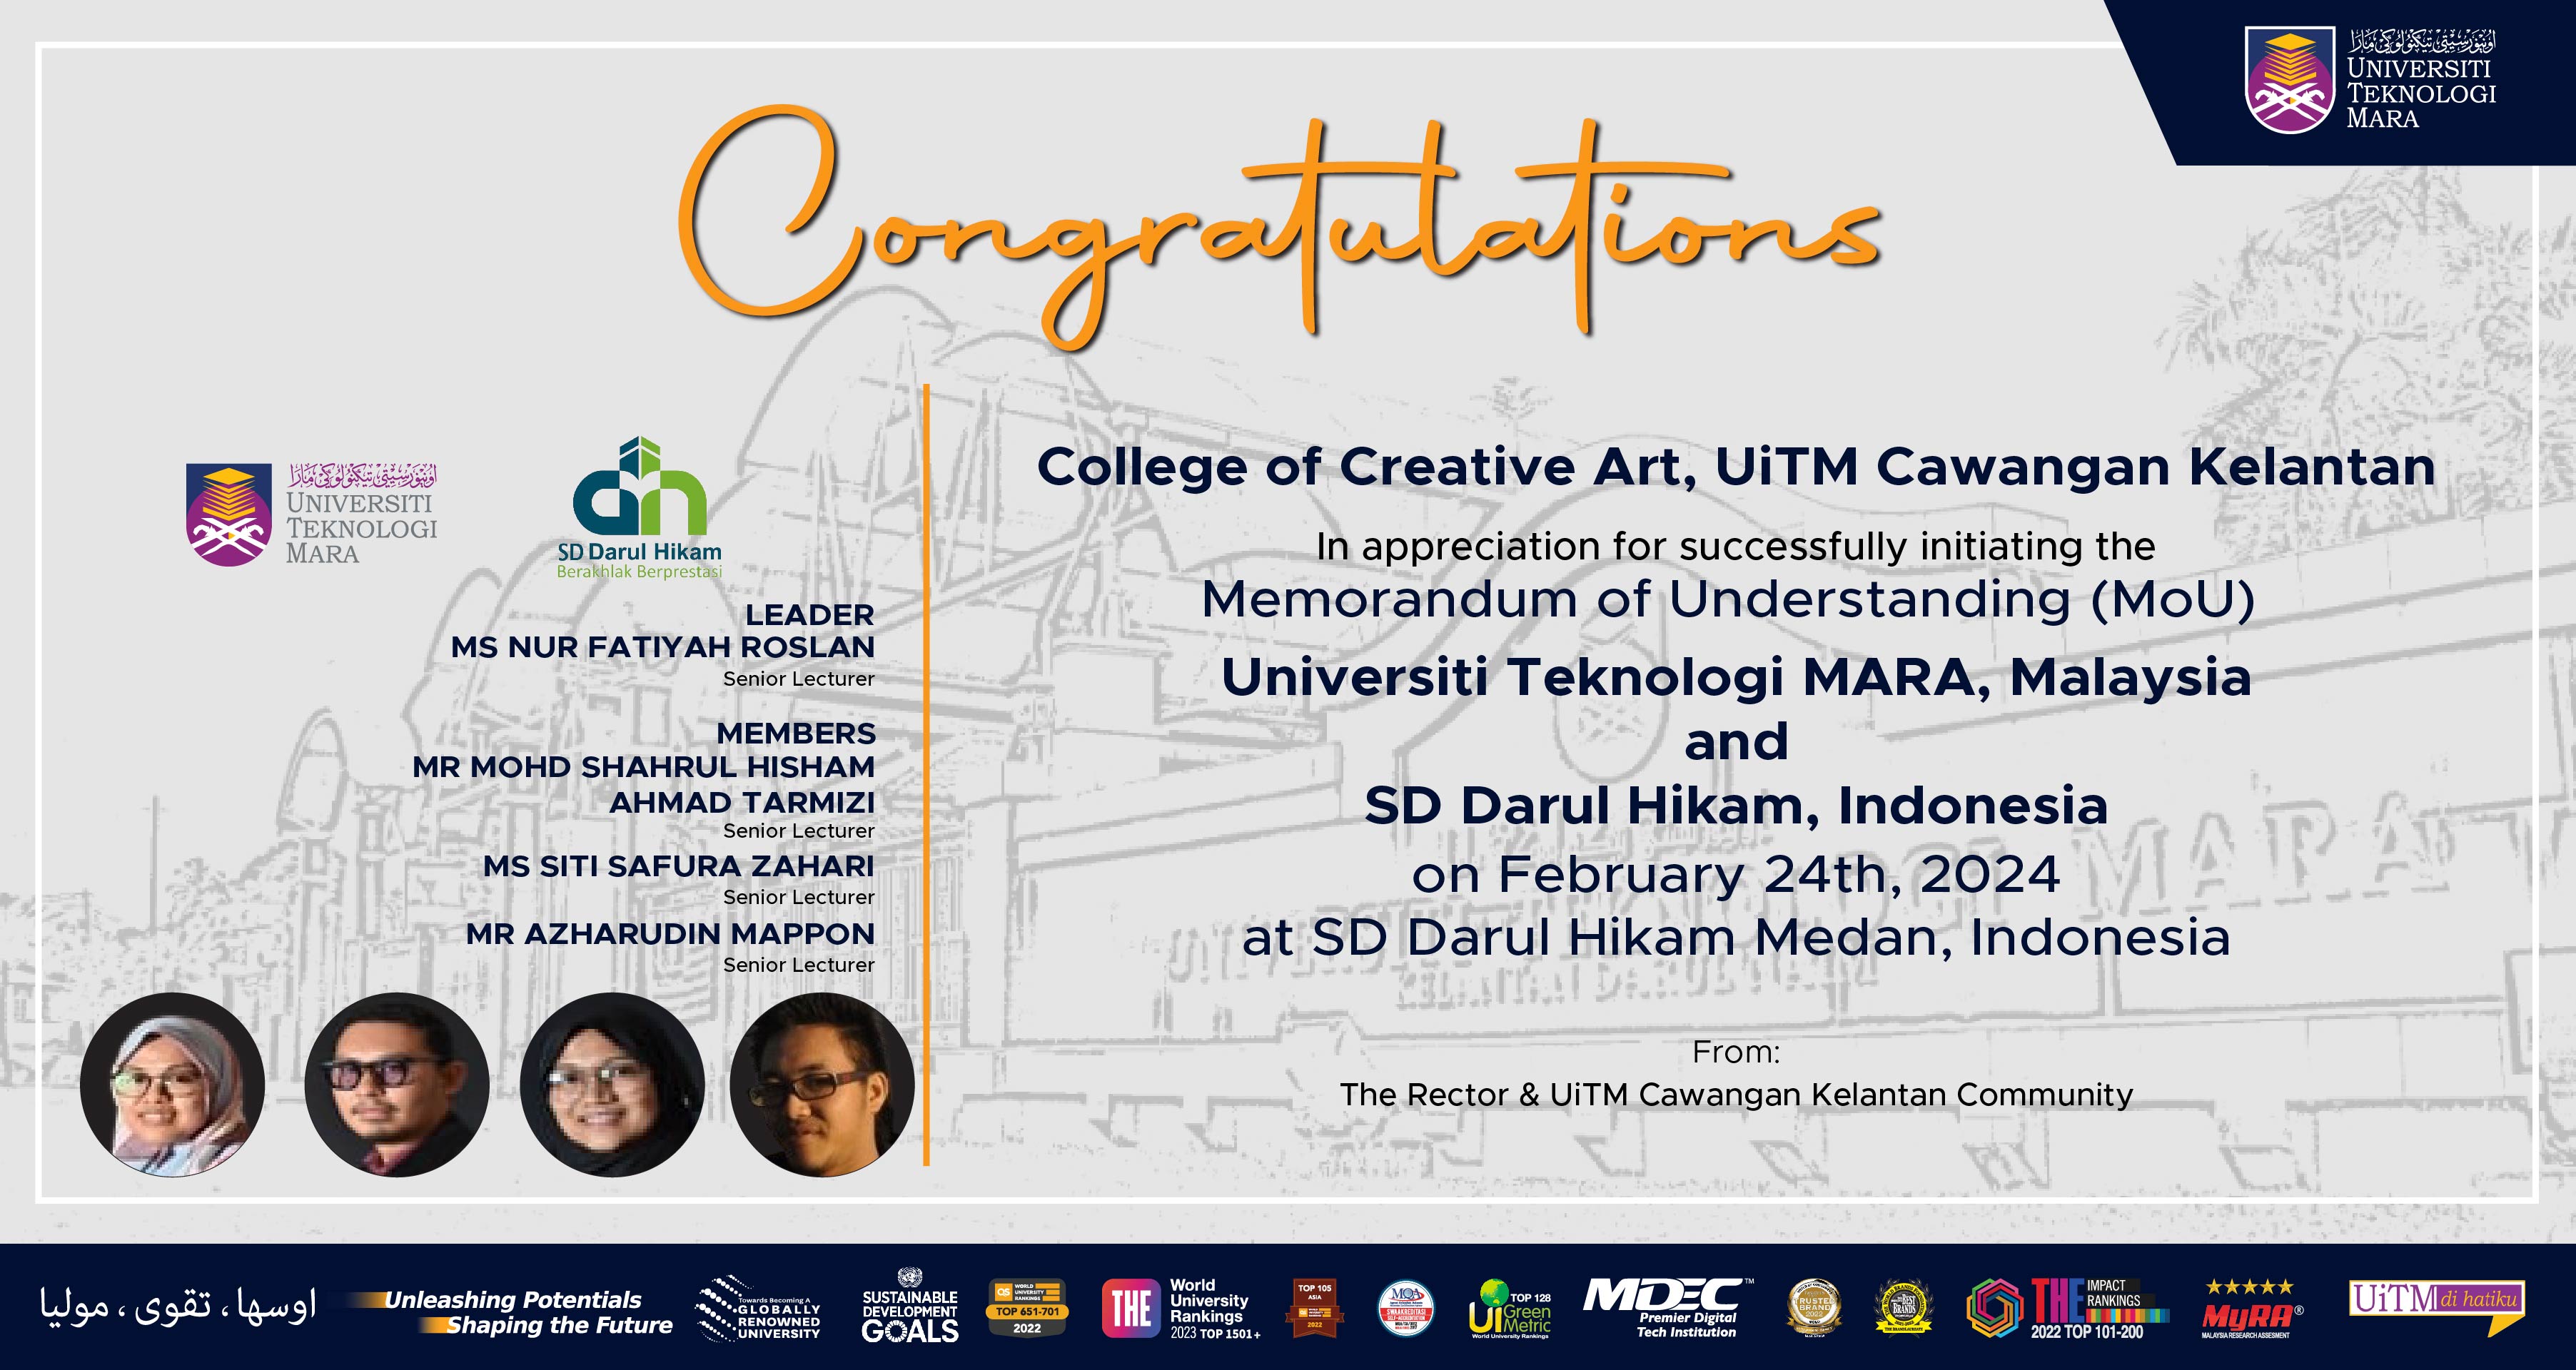 Congratulations!!! College of Creative Art, MoU between UiTM, Malaysia and SD Darul Hikam, Indonesia